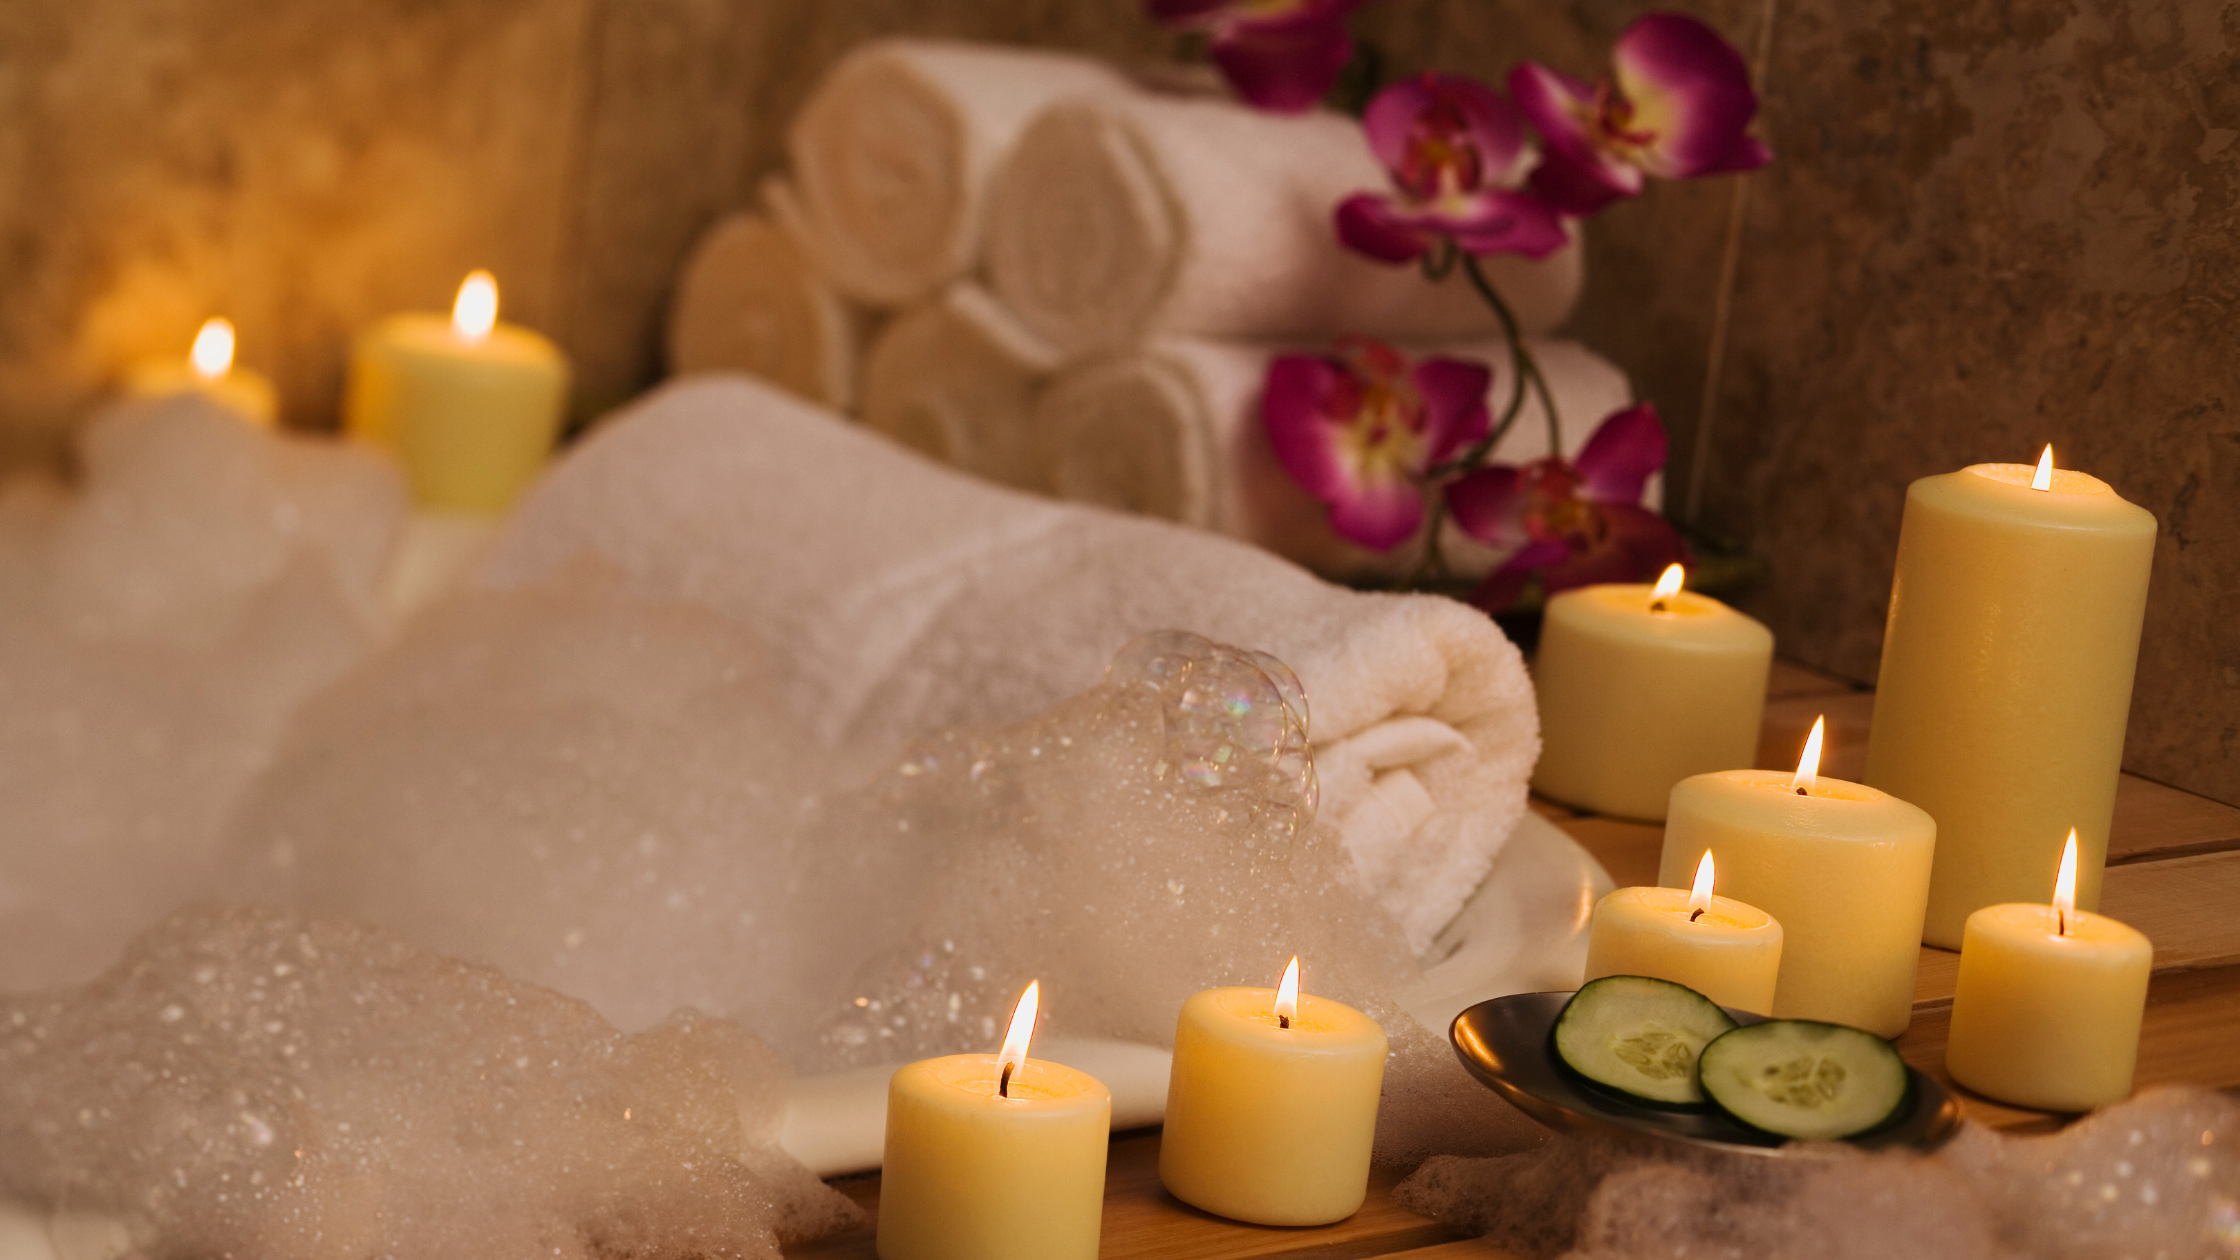 bubble bath surrounded by candles and flowers